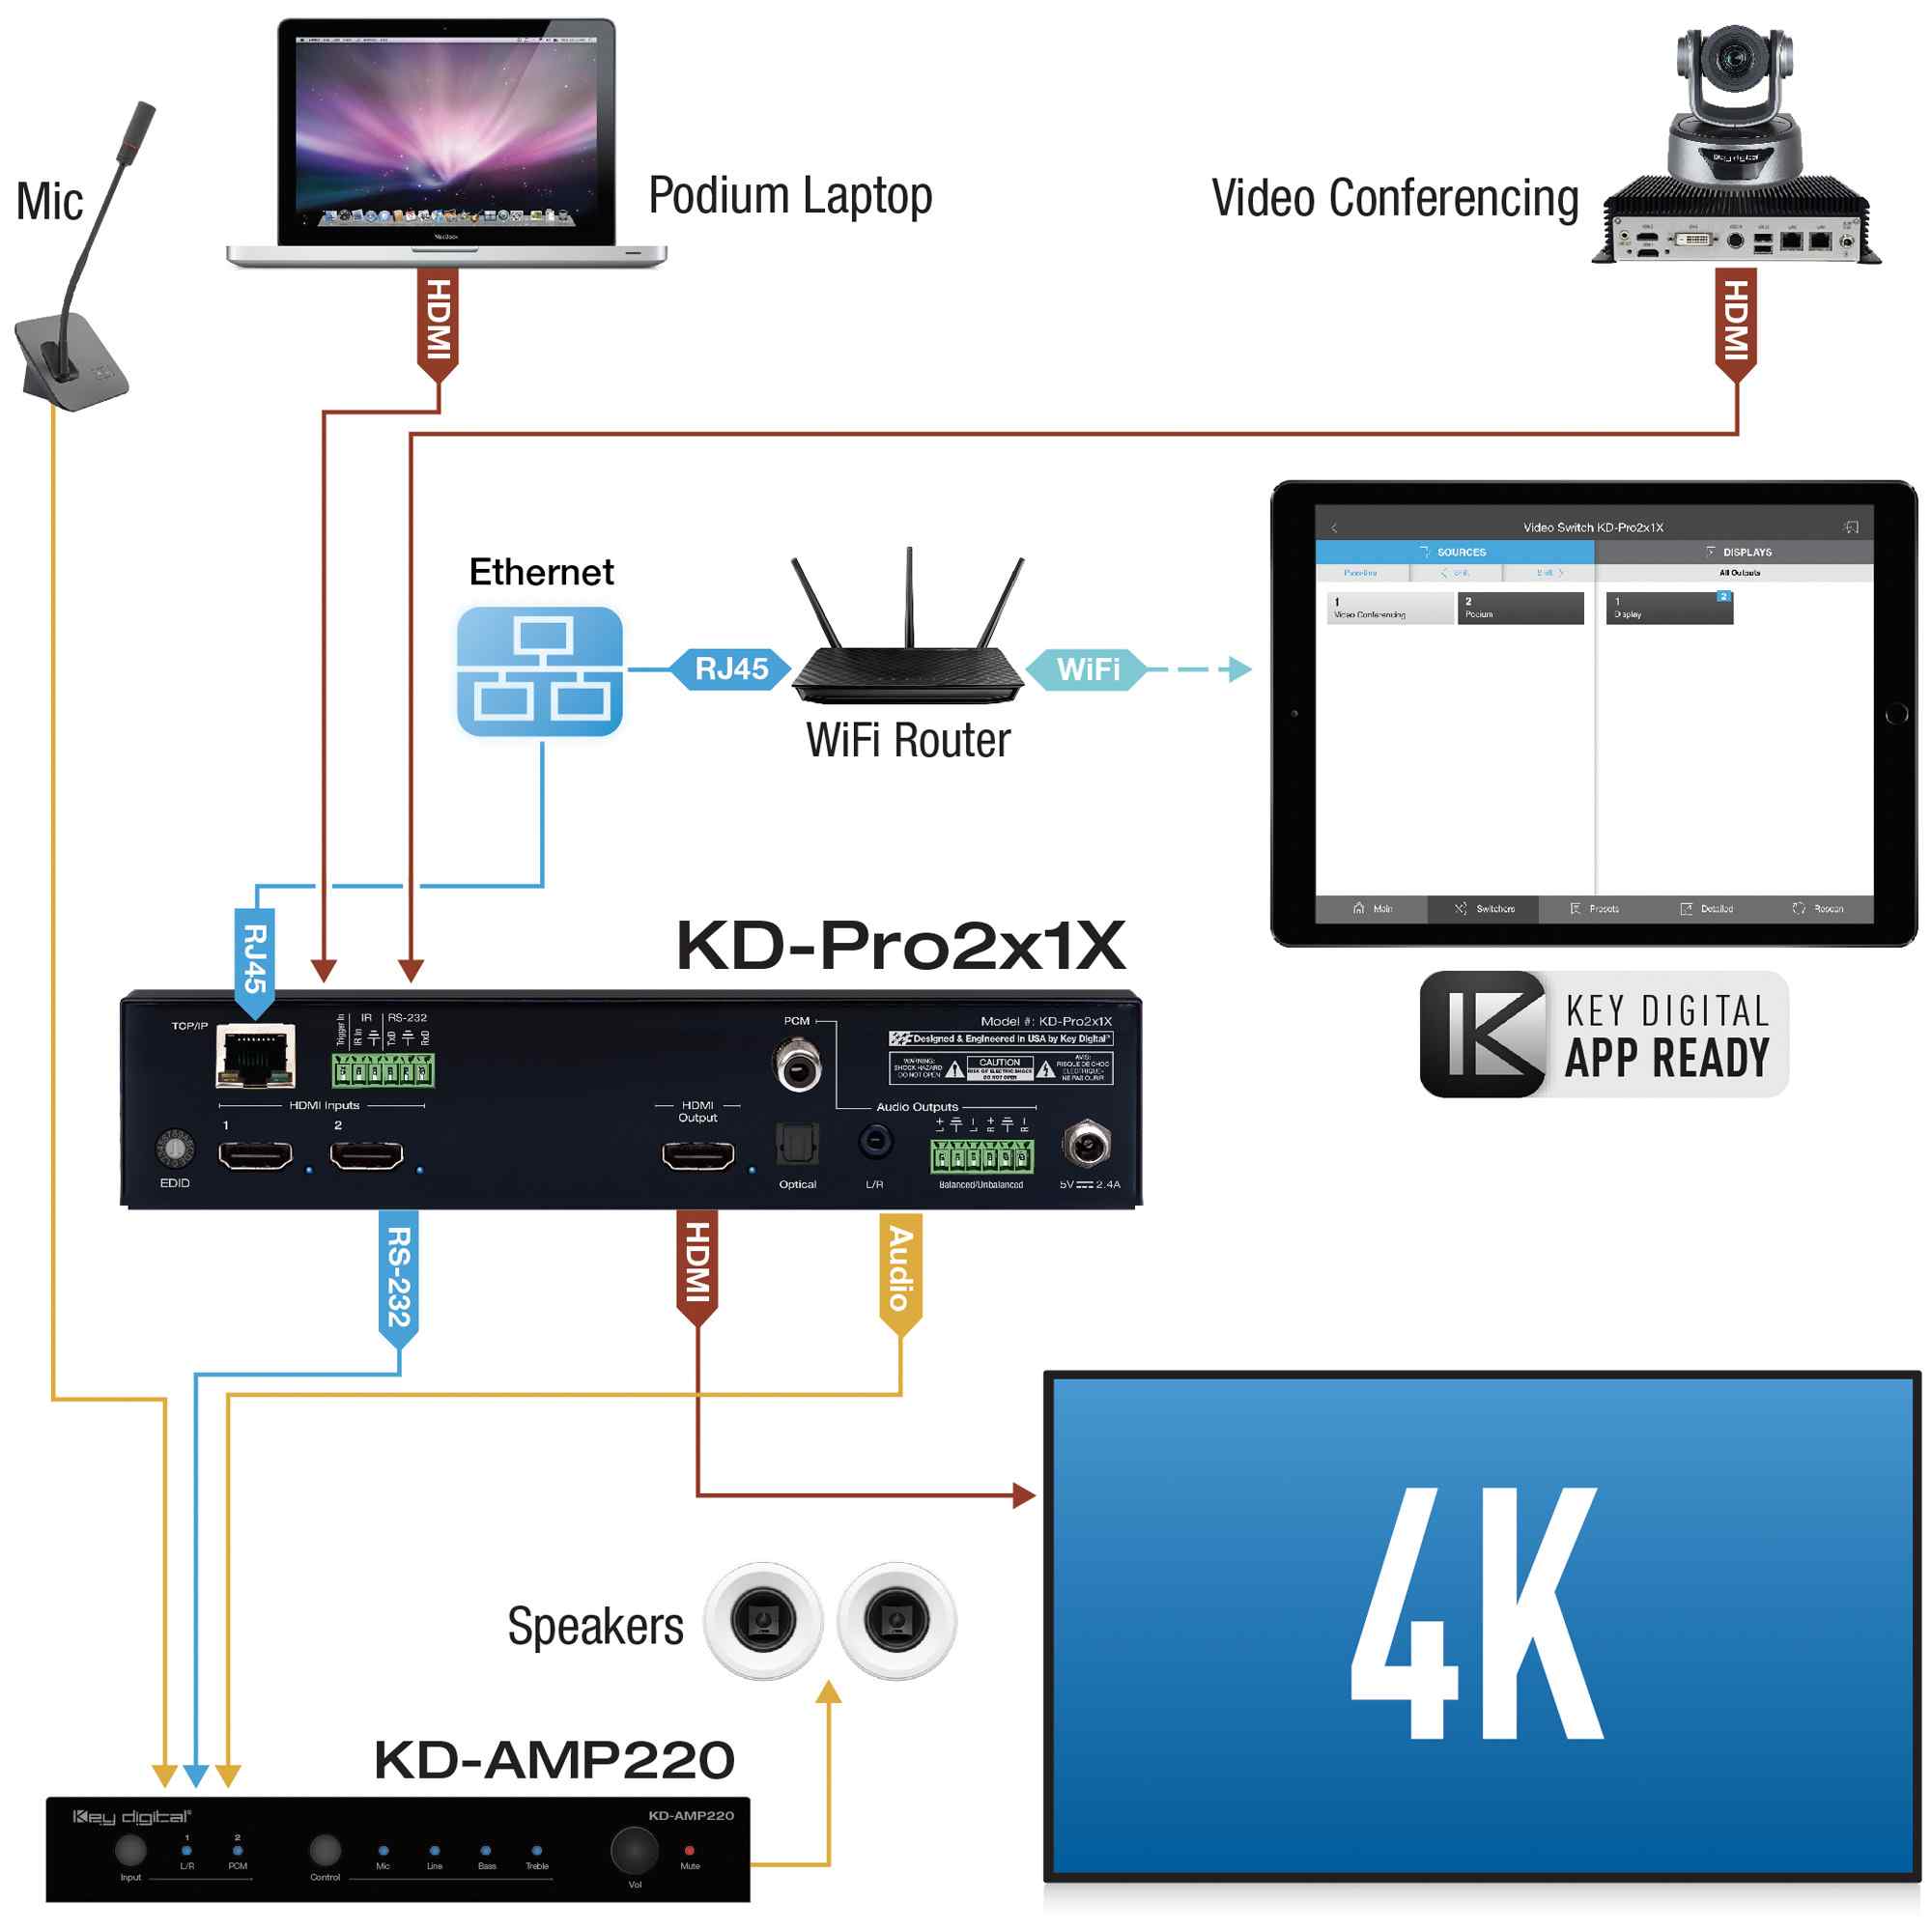 Thumbnail of Key digital Example Diagram 2 port HDMI switch connected to podium laptop, video conferencing cam, and a 4K display 